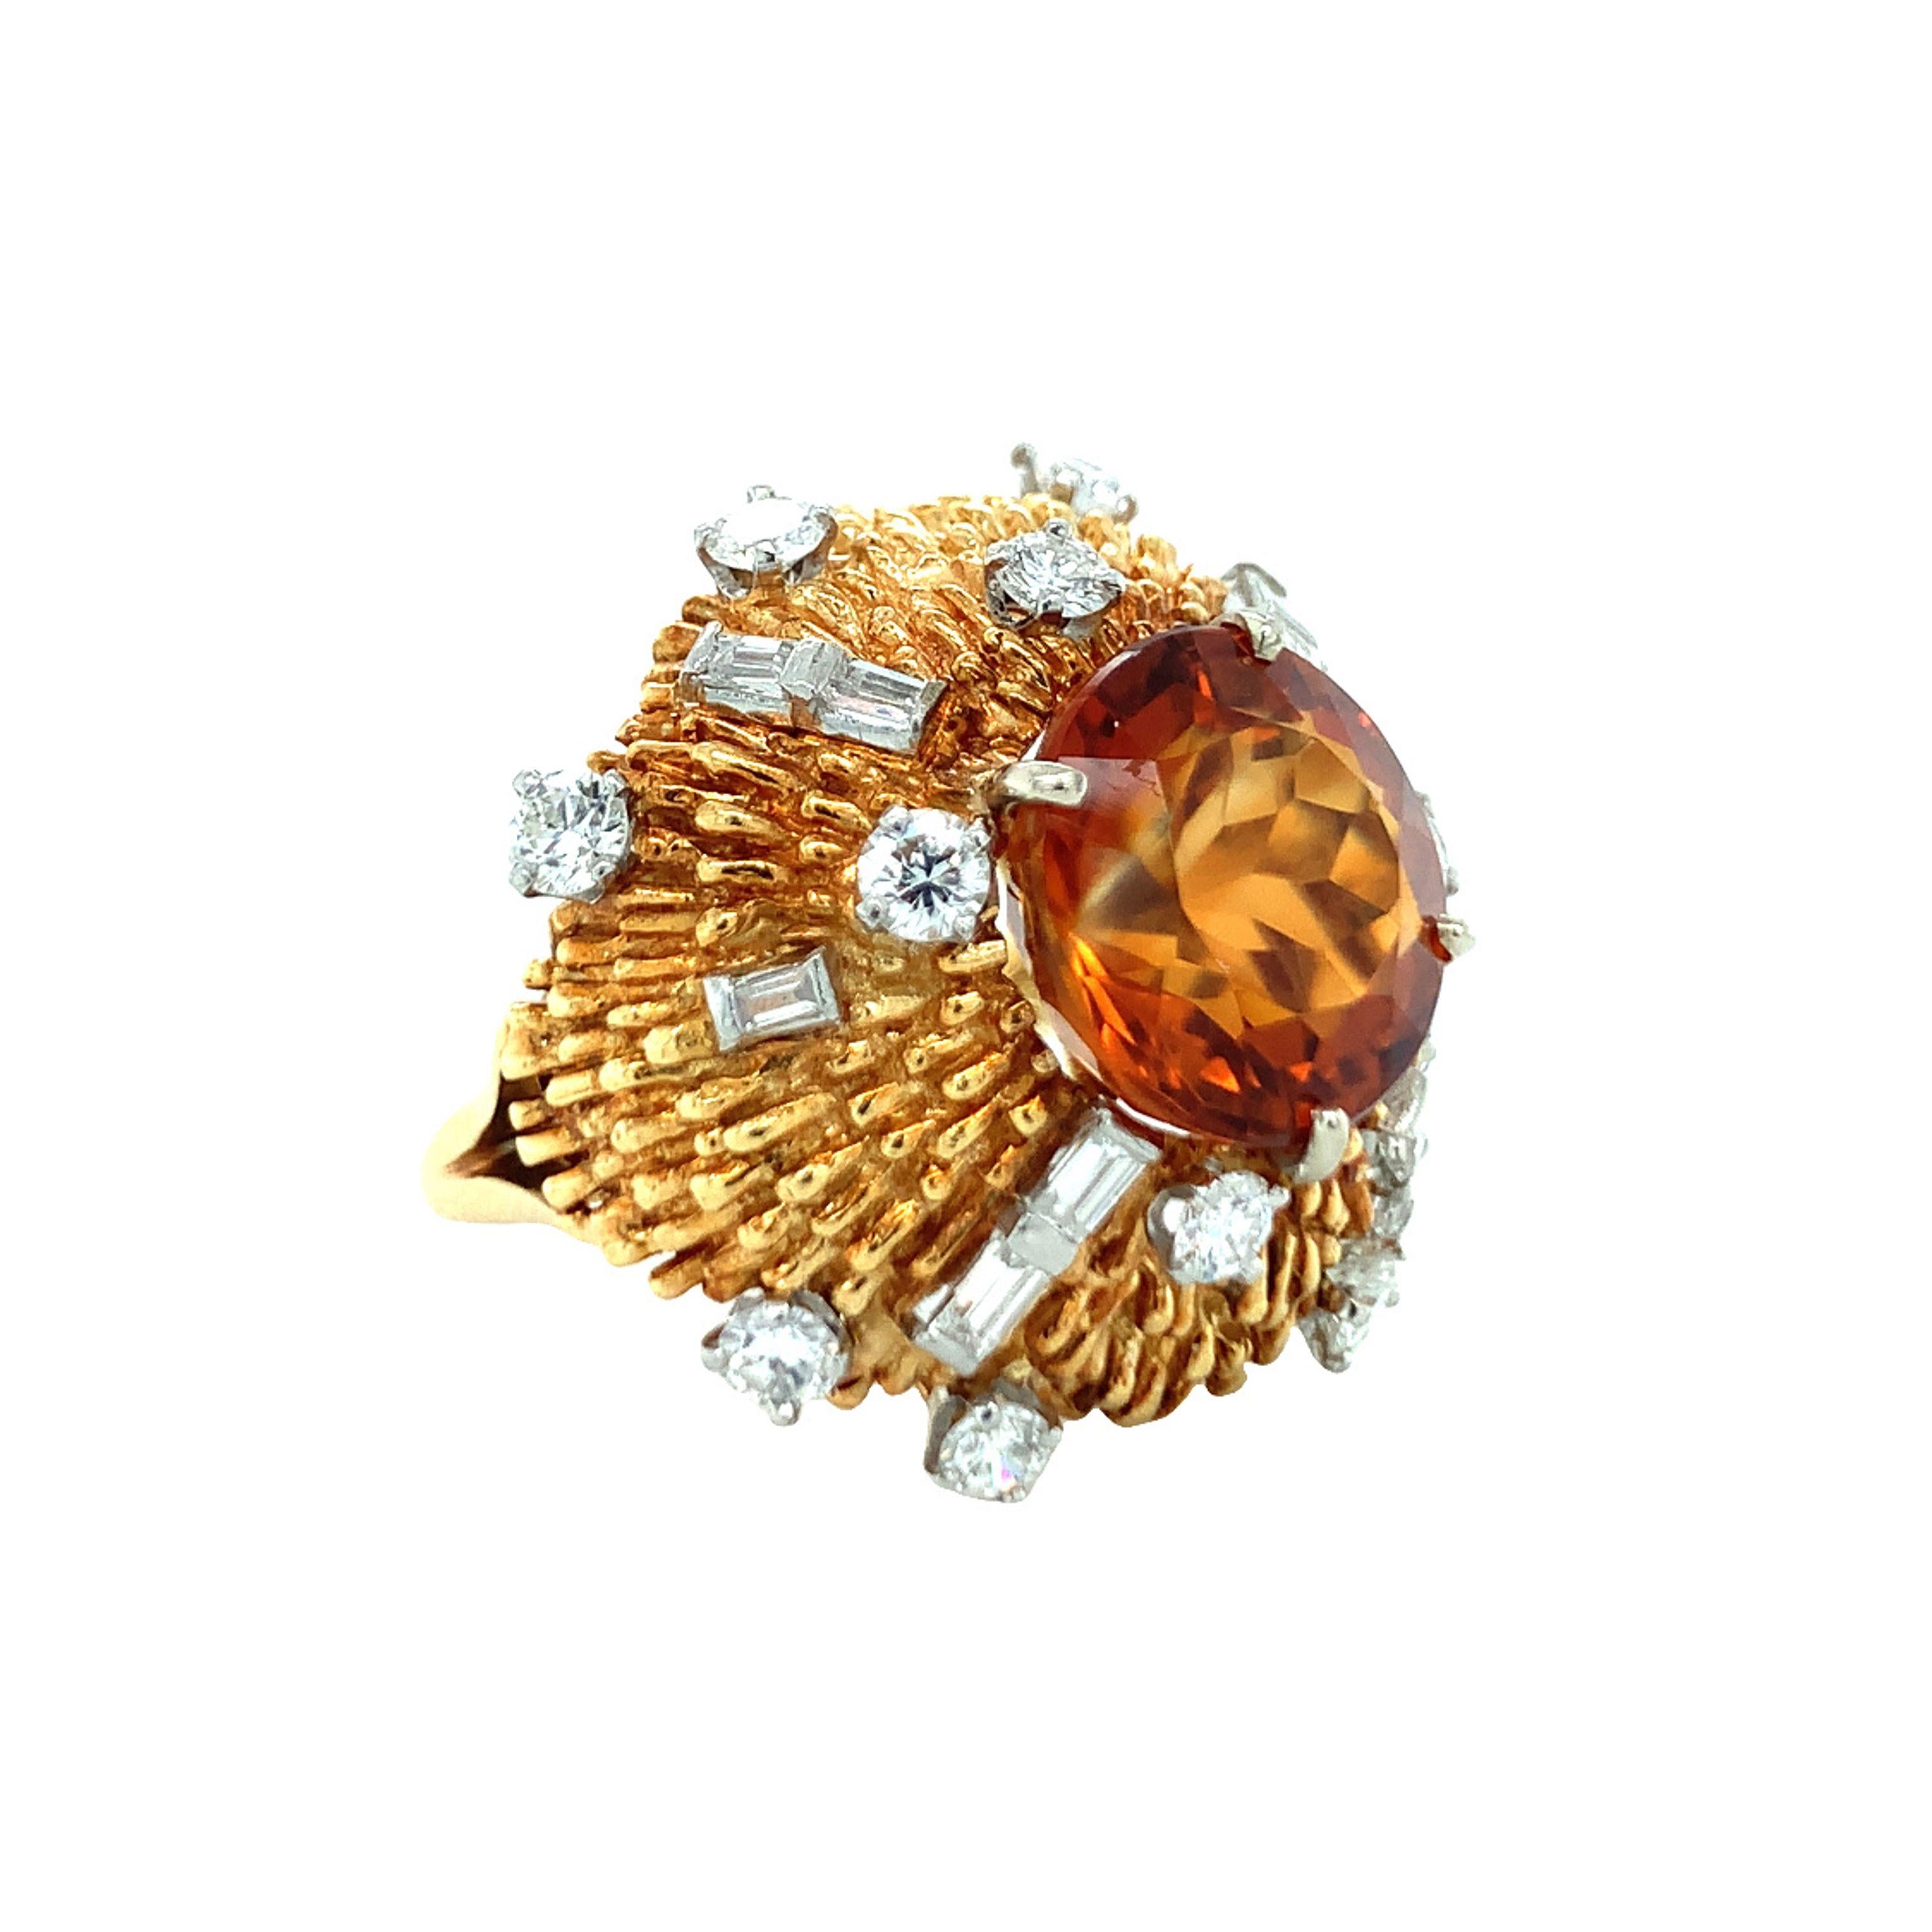 One citrine and diamond 18K yellow gold and platinum ring centering one deep orangey amber color citrine weighing 7 ct. The ring is enhanced by platinum set, round brilliant and baguette cut diamonds weighing a total of 2.25 ct. with G color and